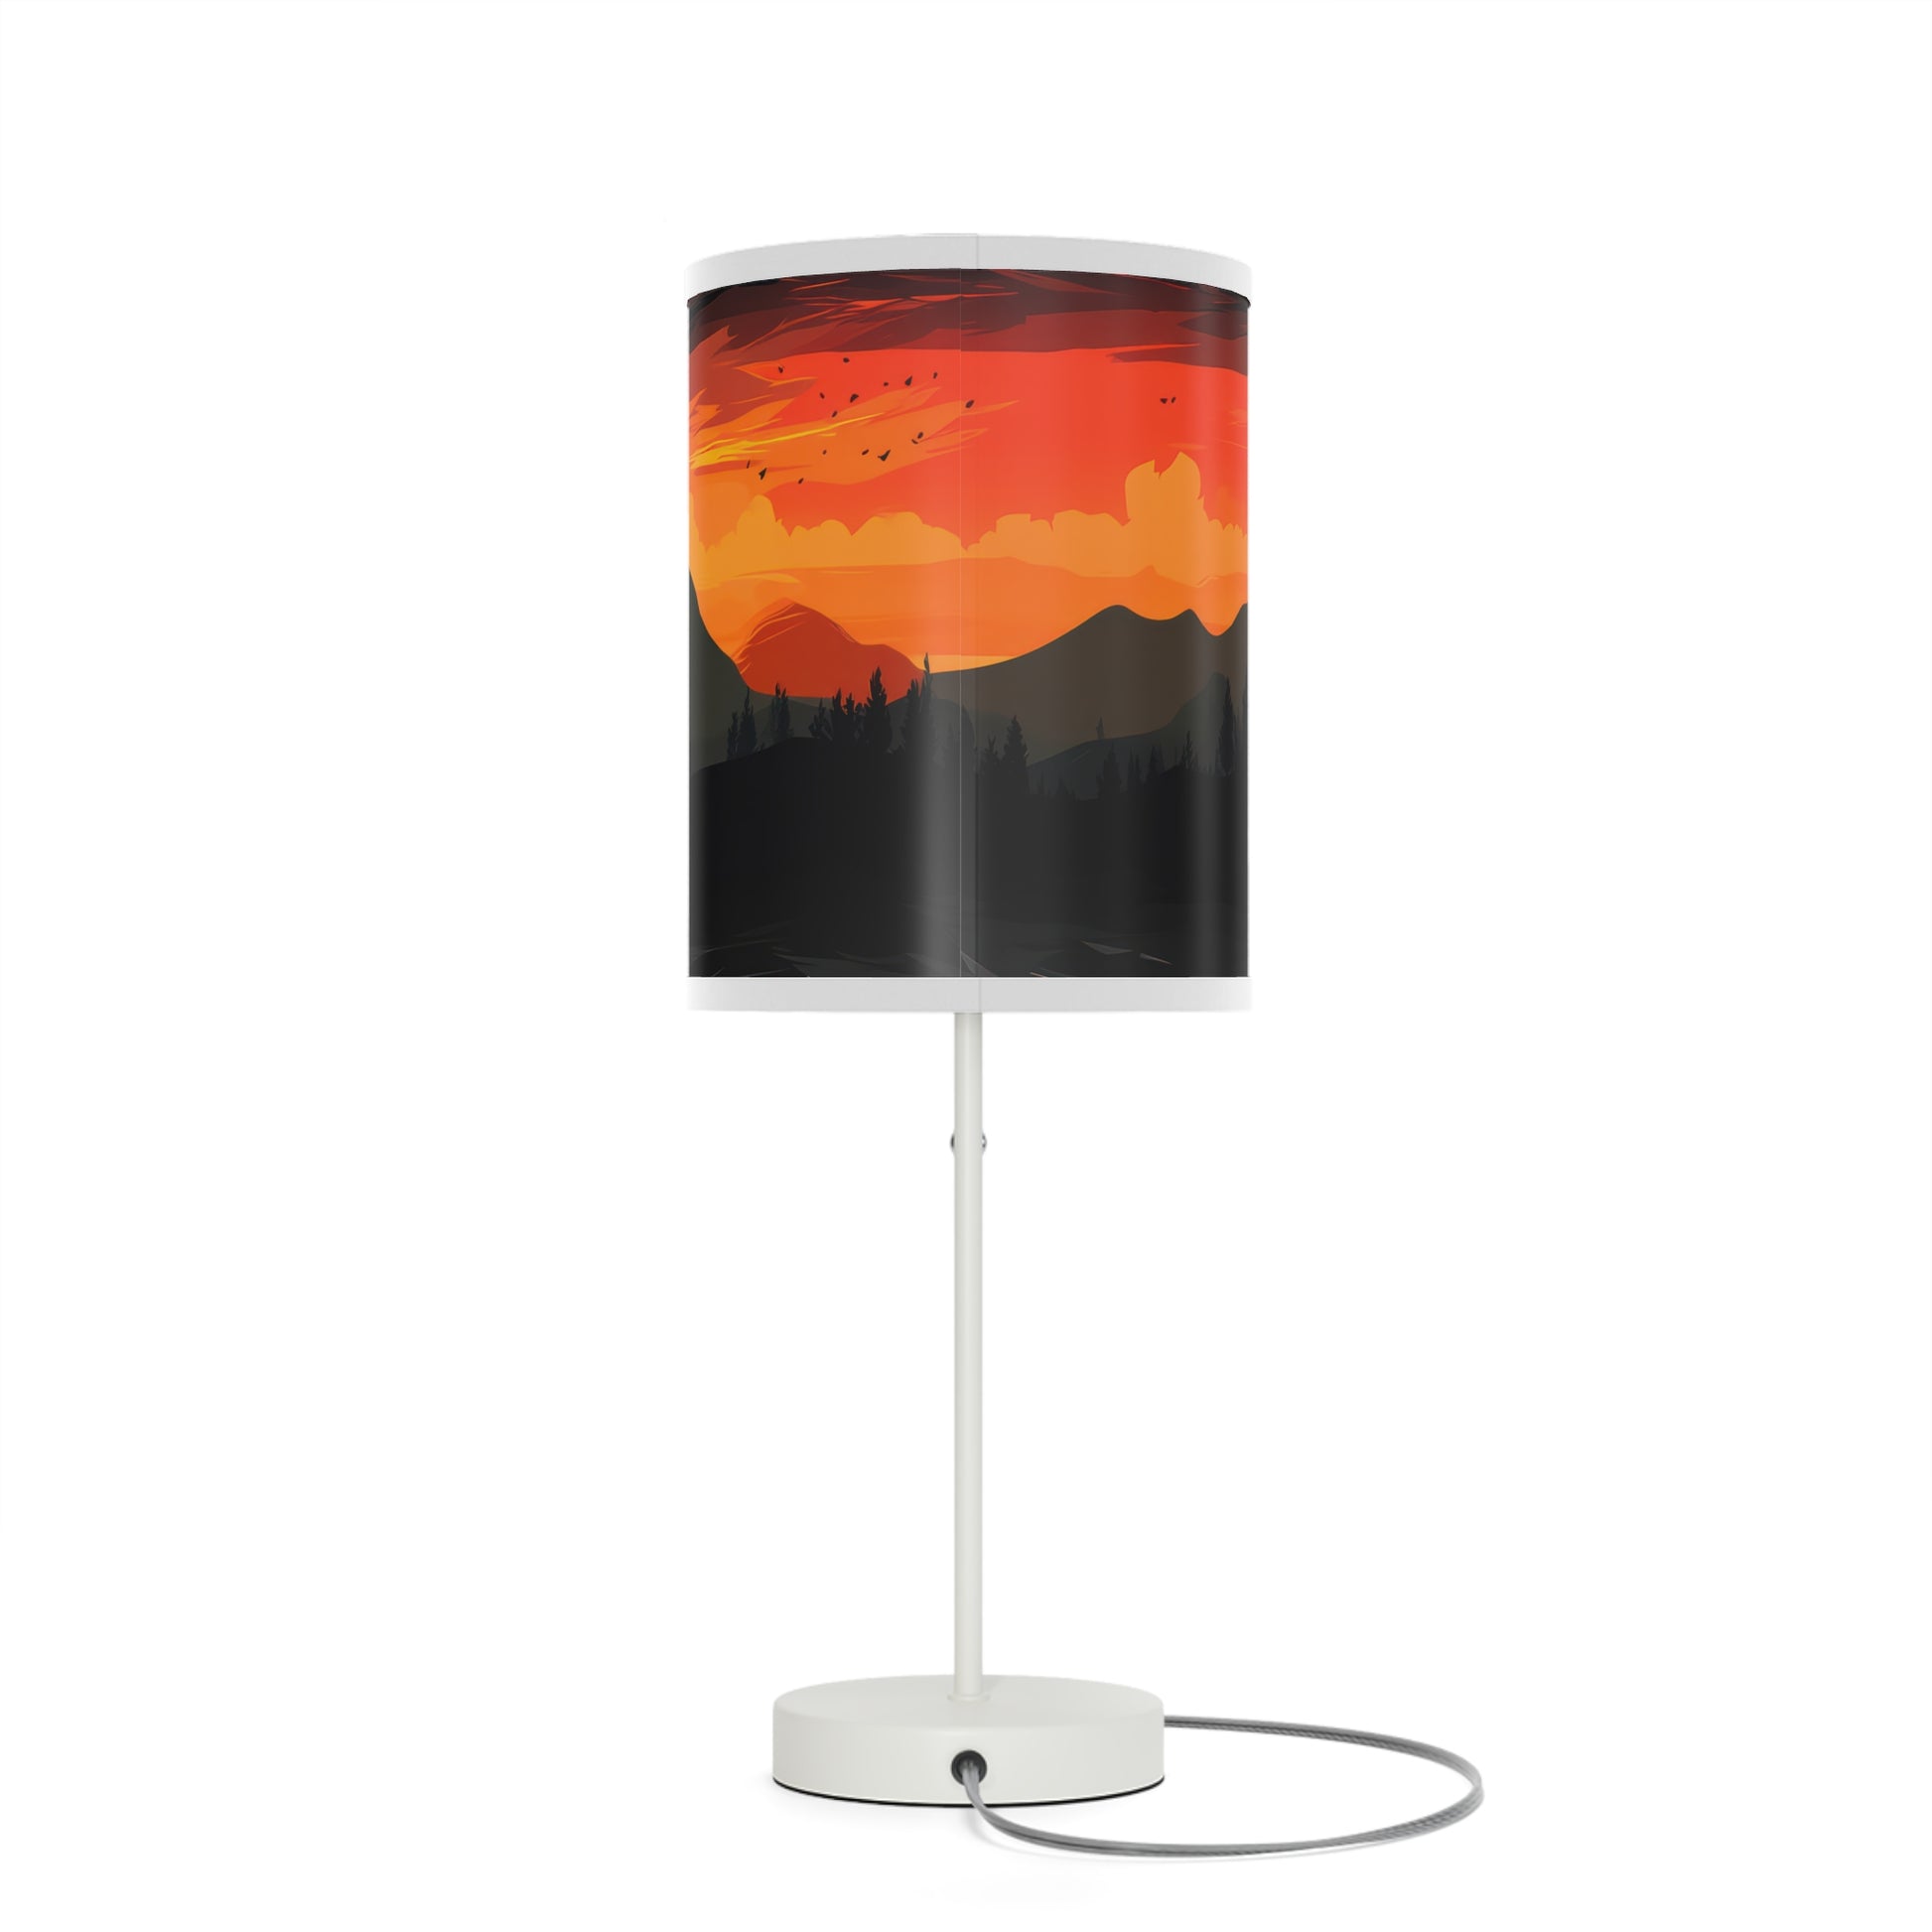 Sunset Silhouette - Lamp captures indoor sunset magic. With a realistic print of mountains and sunset, it bathes rooms in inviting hues. Radiant yet calming, its soft glow mimics natural sunsets, perfect for winding down. The lamp's 20" × 7" size, solid white steel base, and versatile design make it a charming addition to side tables, work desks, or nightstands.